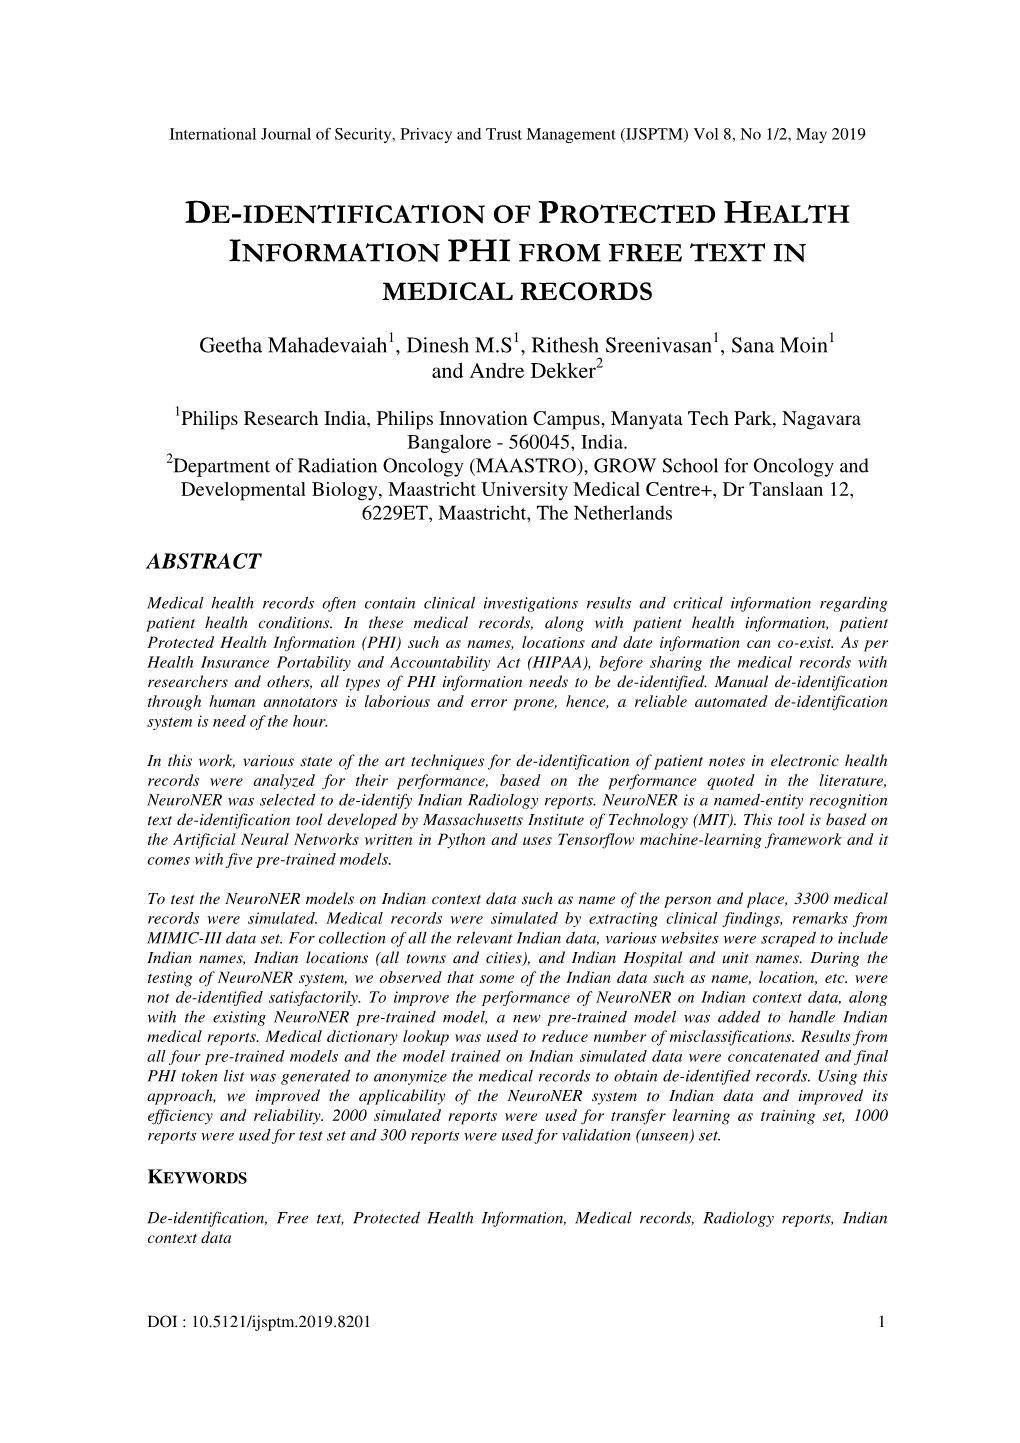 De-Identification of Protected Health Information Phi from Free Text in Medical Records